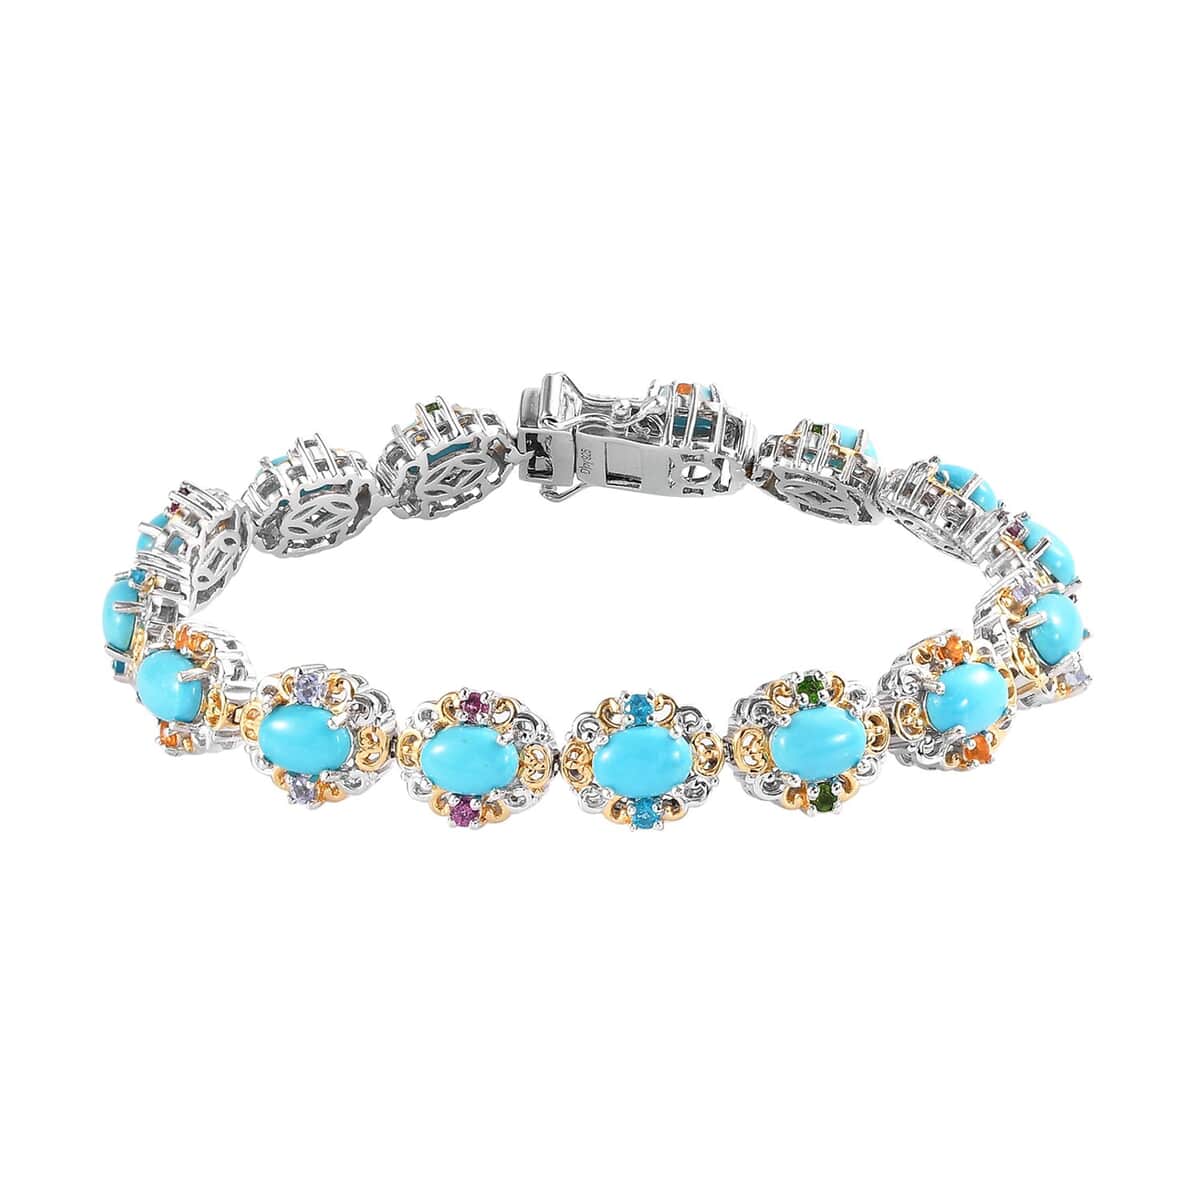 Premium American Natural Sleeping Beauty Turquoise, Multi Gemstone Bracelet in Vermeil YG and Platinum Over Sterling Silver (7.25 In) (21 g) 11.75 Carat Total Weight image number 0